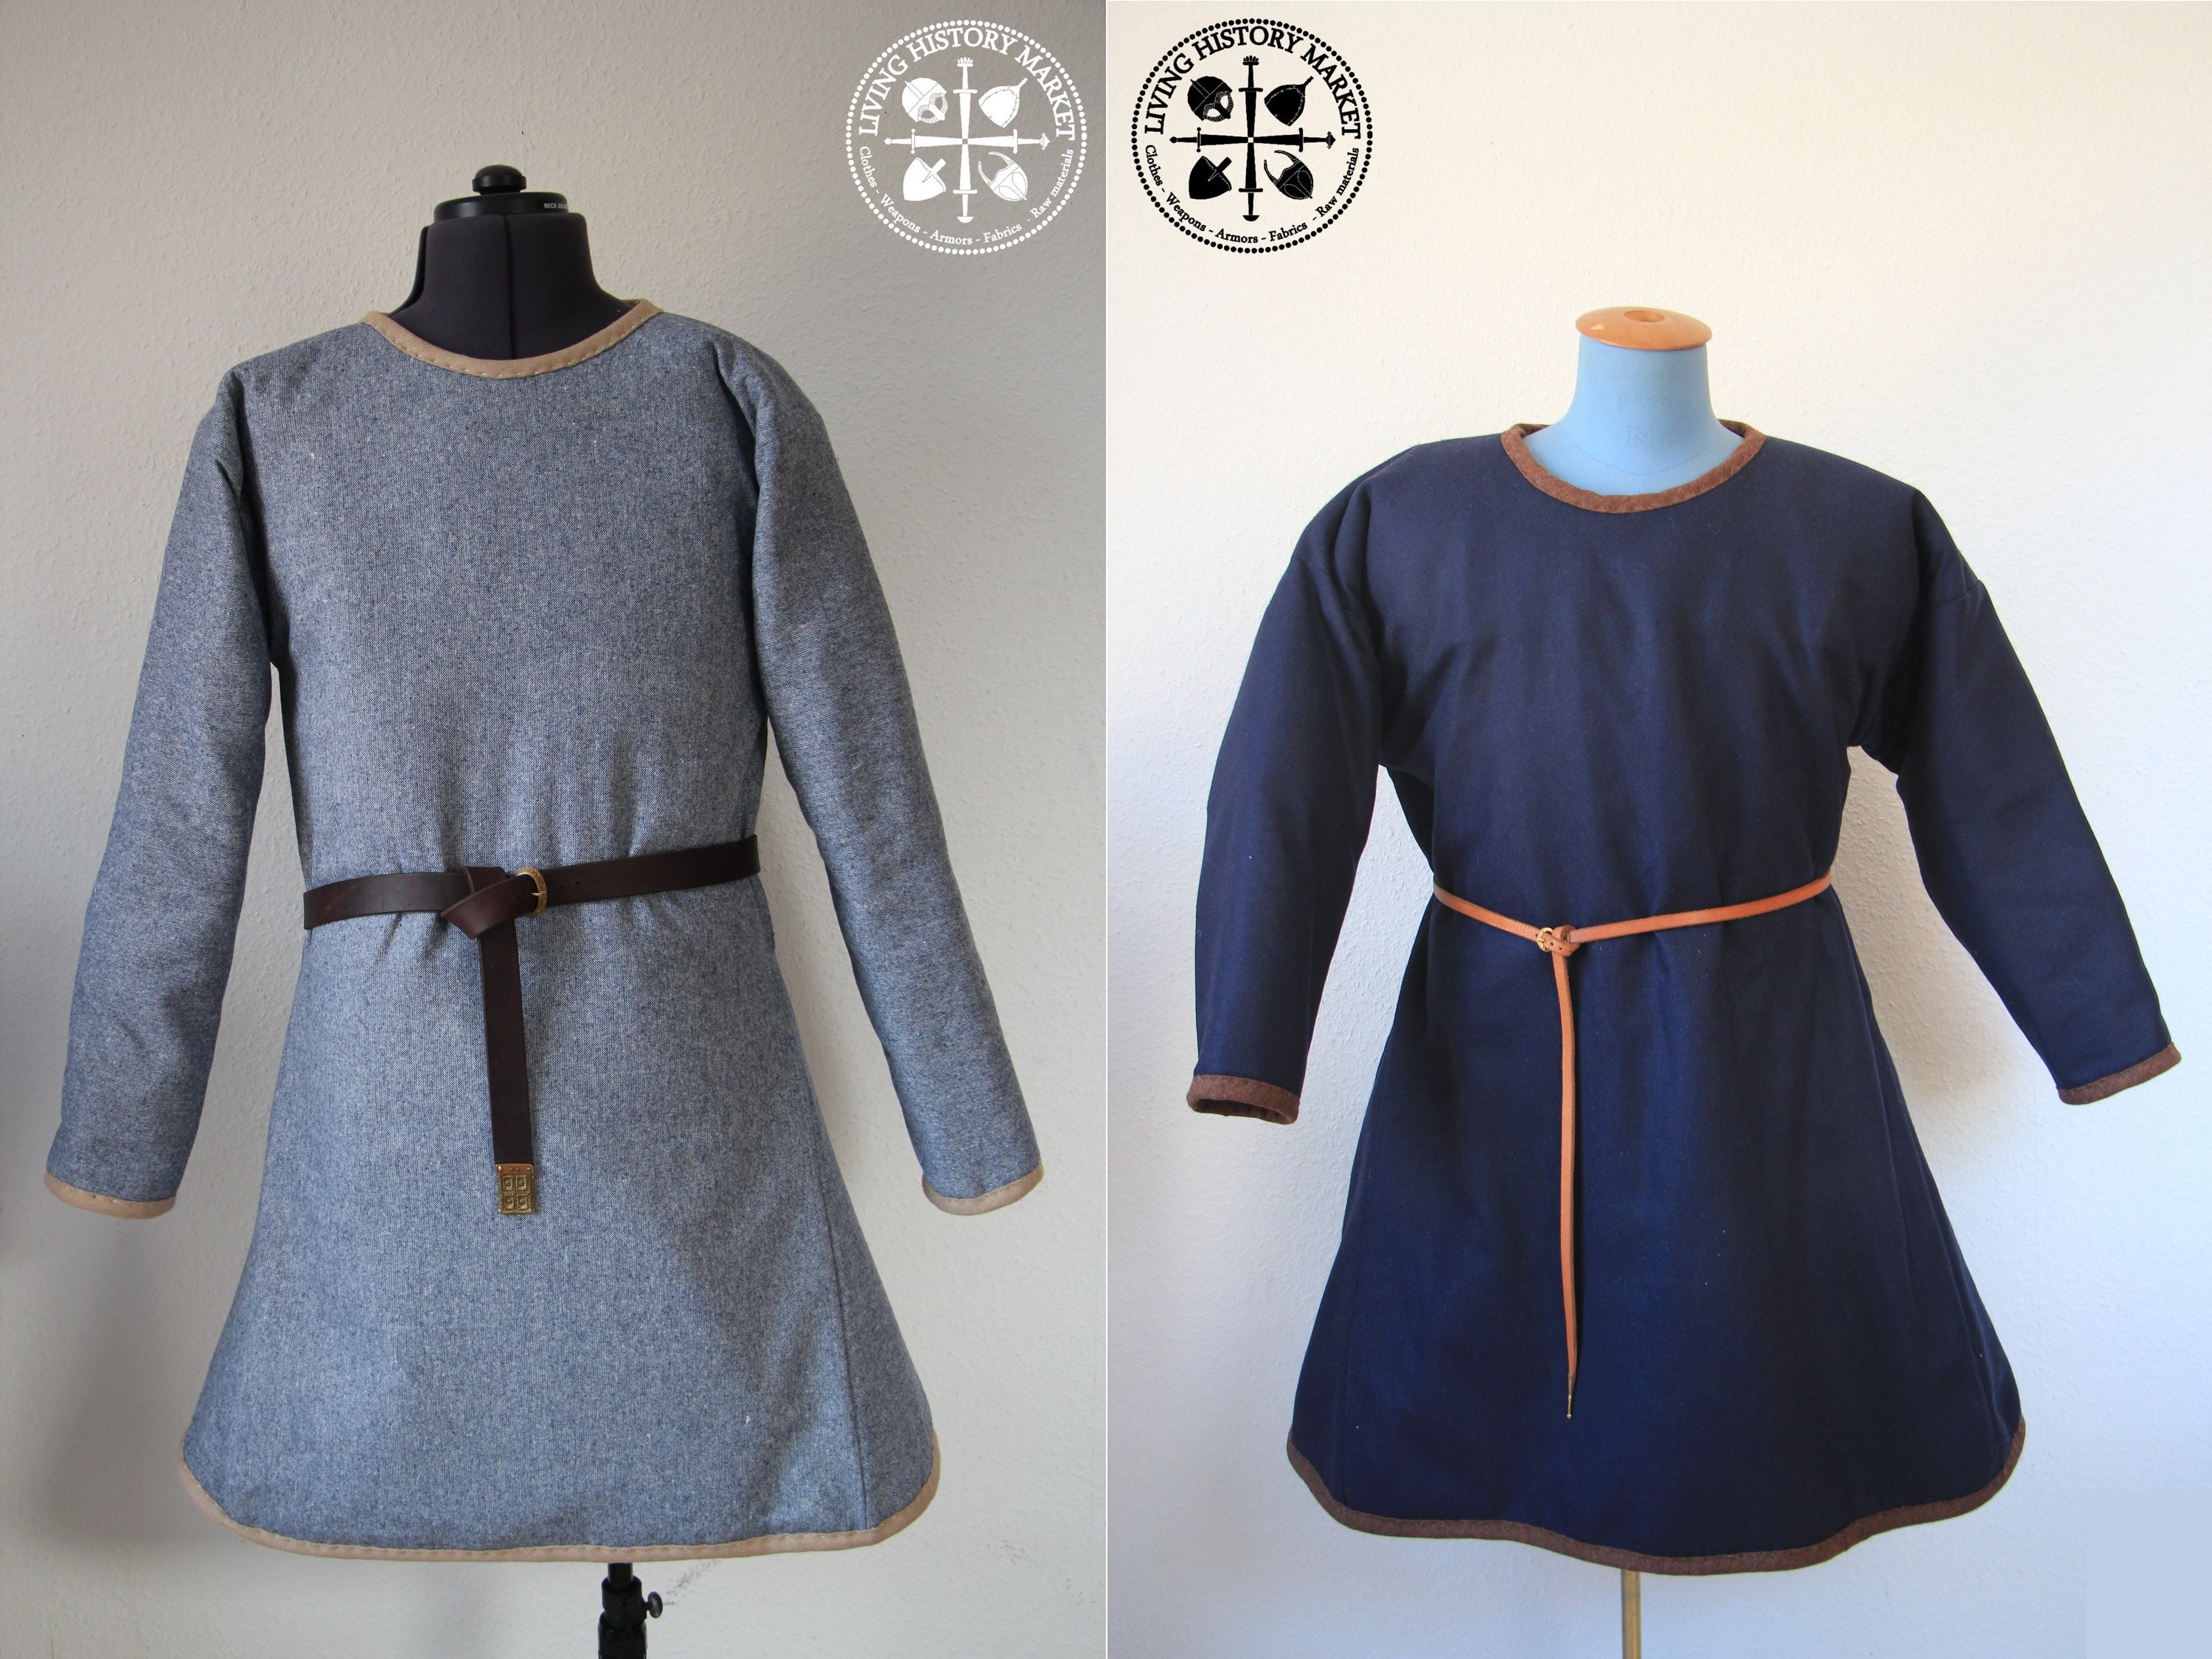 Viking Tunic - Dark Blue Knee Length, Short Sleeves With Embroidered B